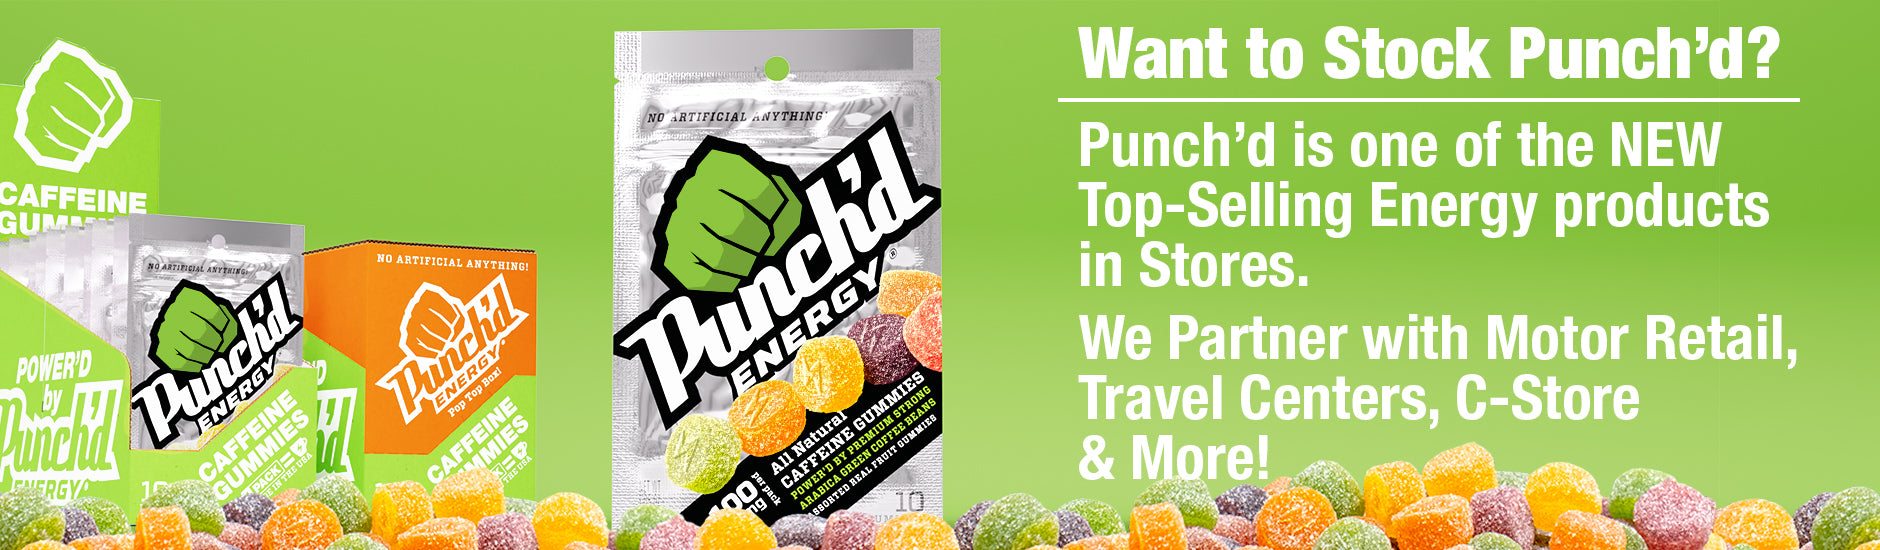 Punch'd Energy is one of the NEW Top-Selling Energy Products in Stores.